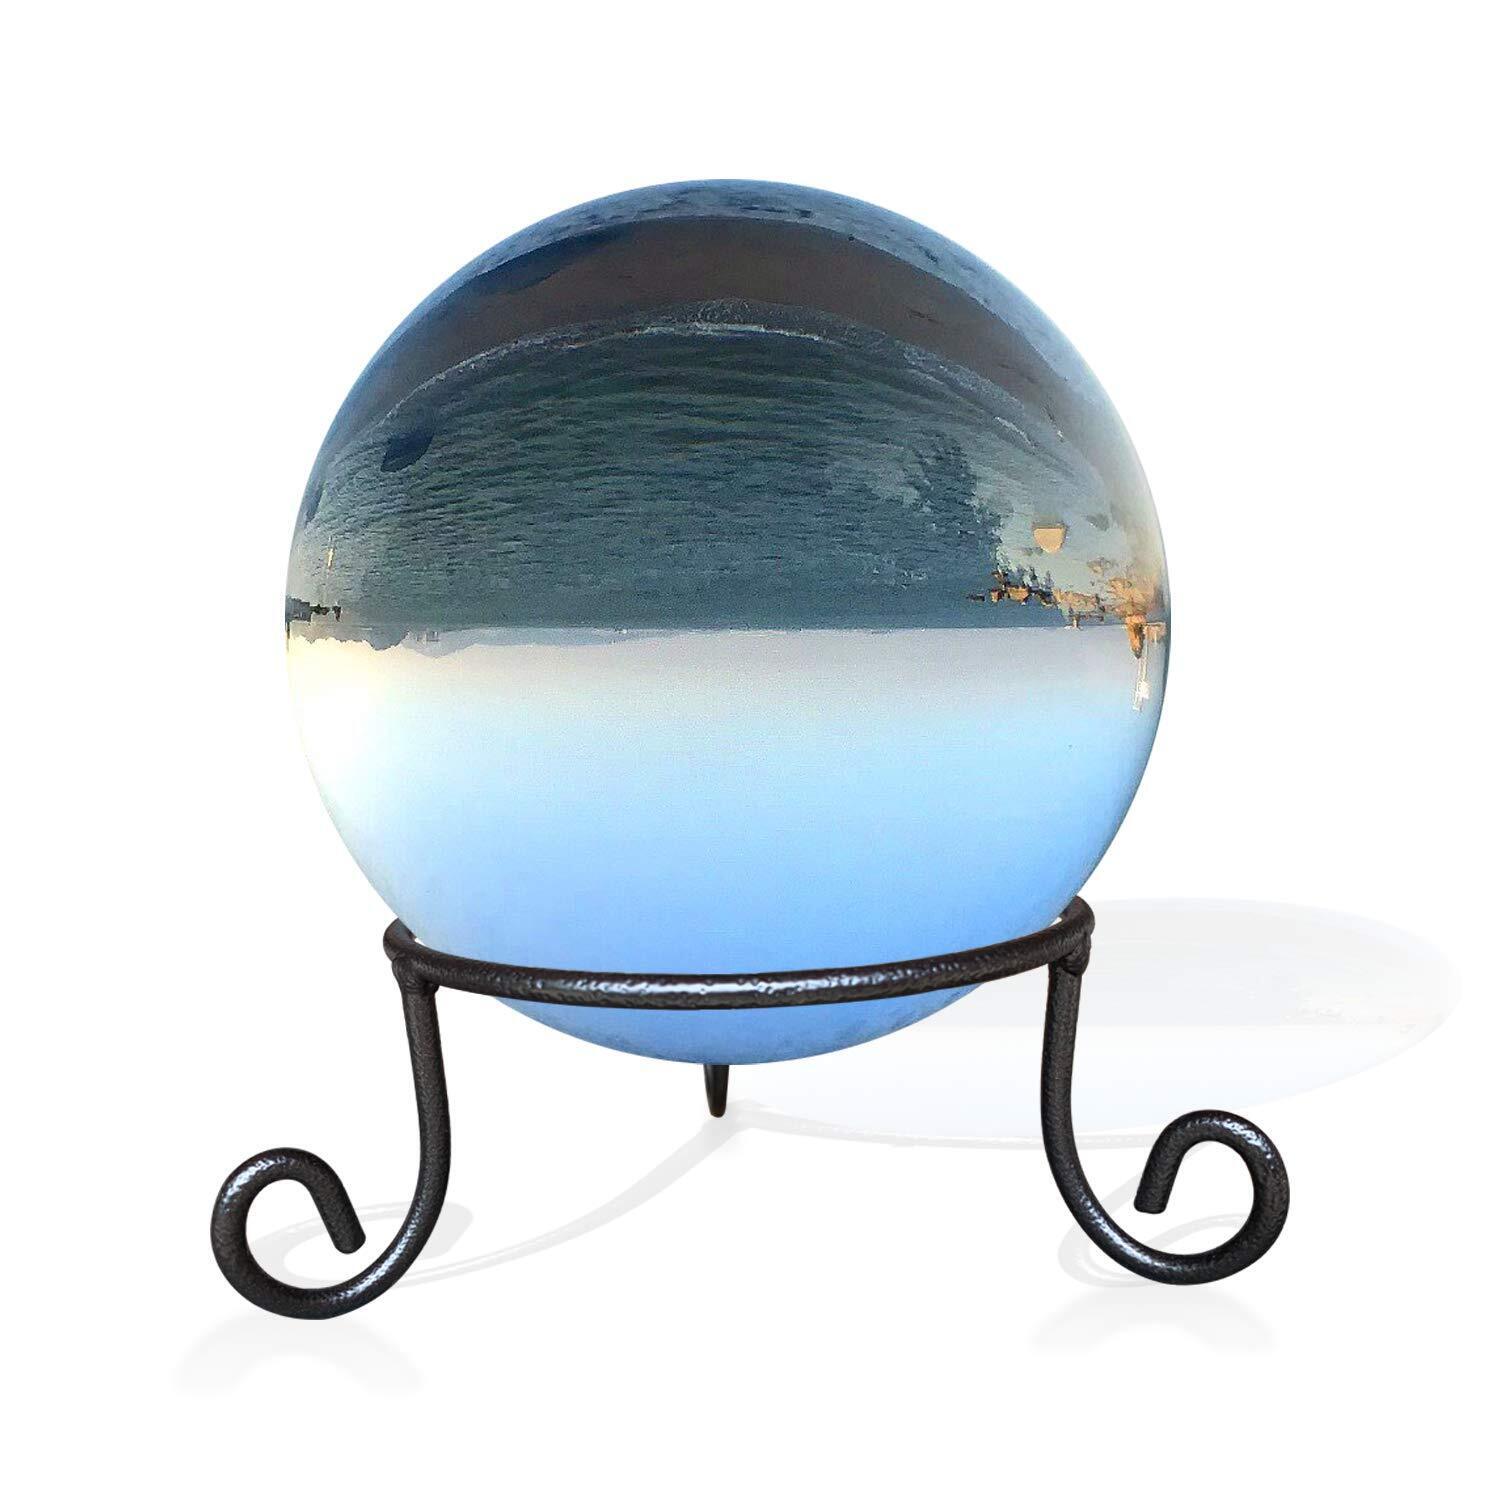 Black Iron Ball Stand - Gazing Globe Stand for Balls Sphere Holder Wrought Iron